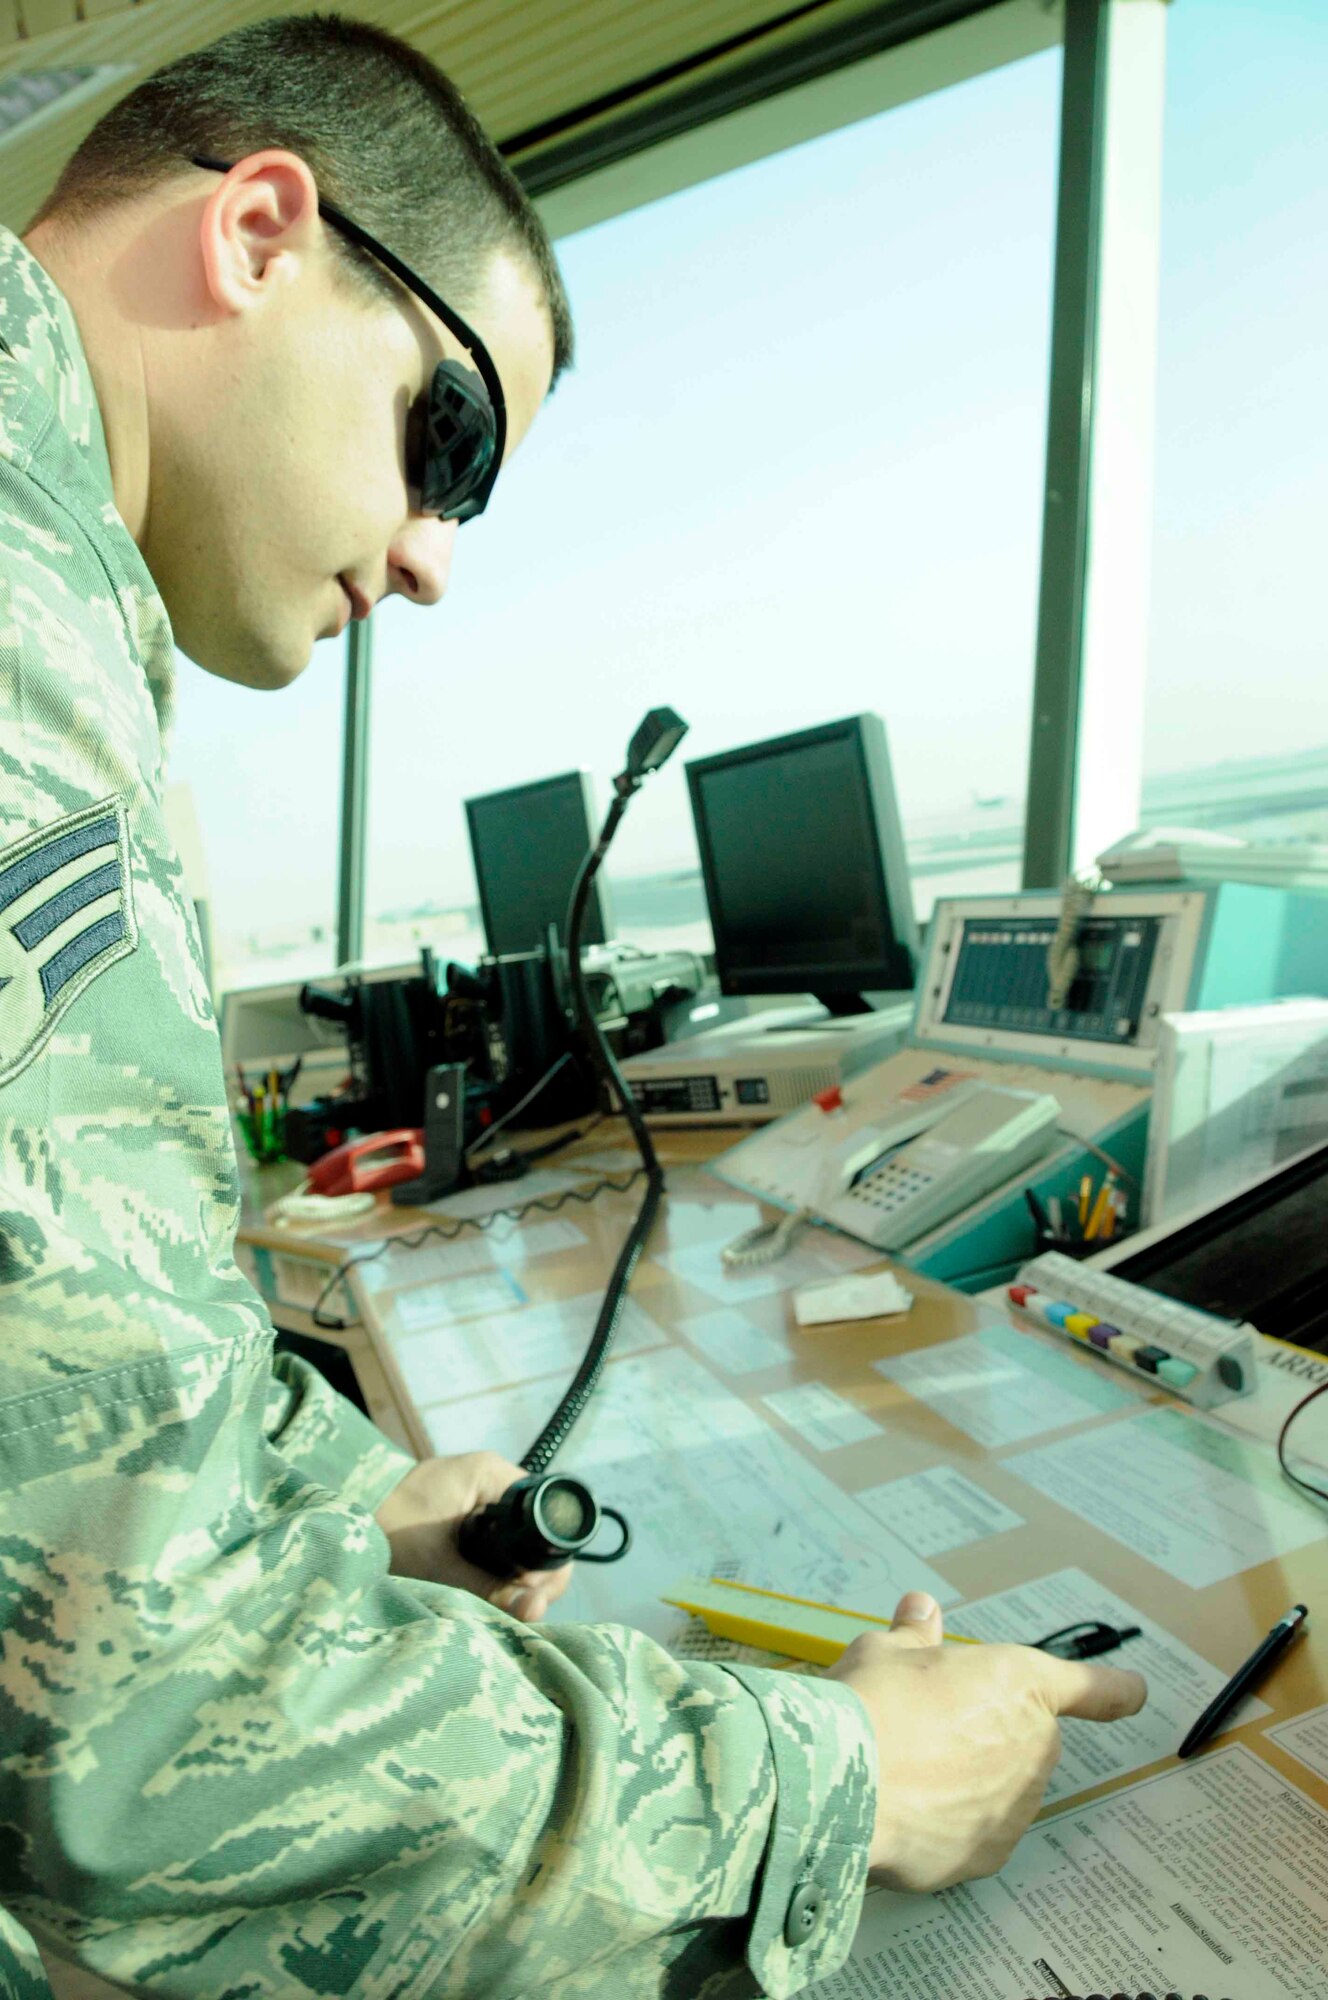 After communicating through radio from the air traffic control tower, Senior Airman Eric Kindle logs an accurate departure time for an aircraft April 15. As an air traffic control journeyman, Airman Kindle is dedicated to the task of ensuring aircraft taking off or landing do so safely and quickly. (U.S. Air Force photo/Senior Airman Domonique Simmons)